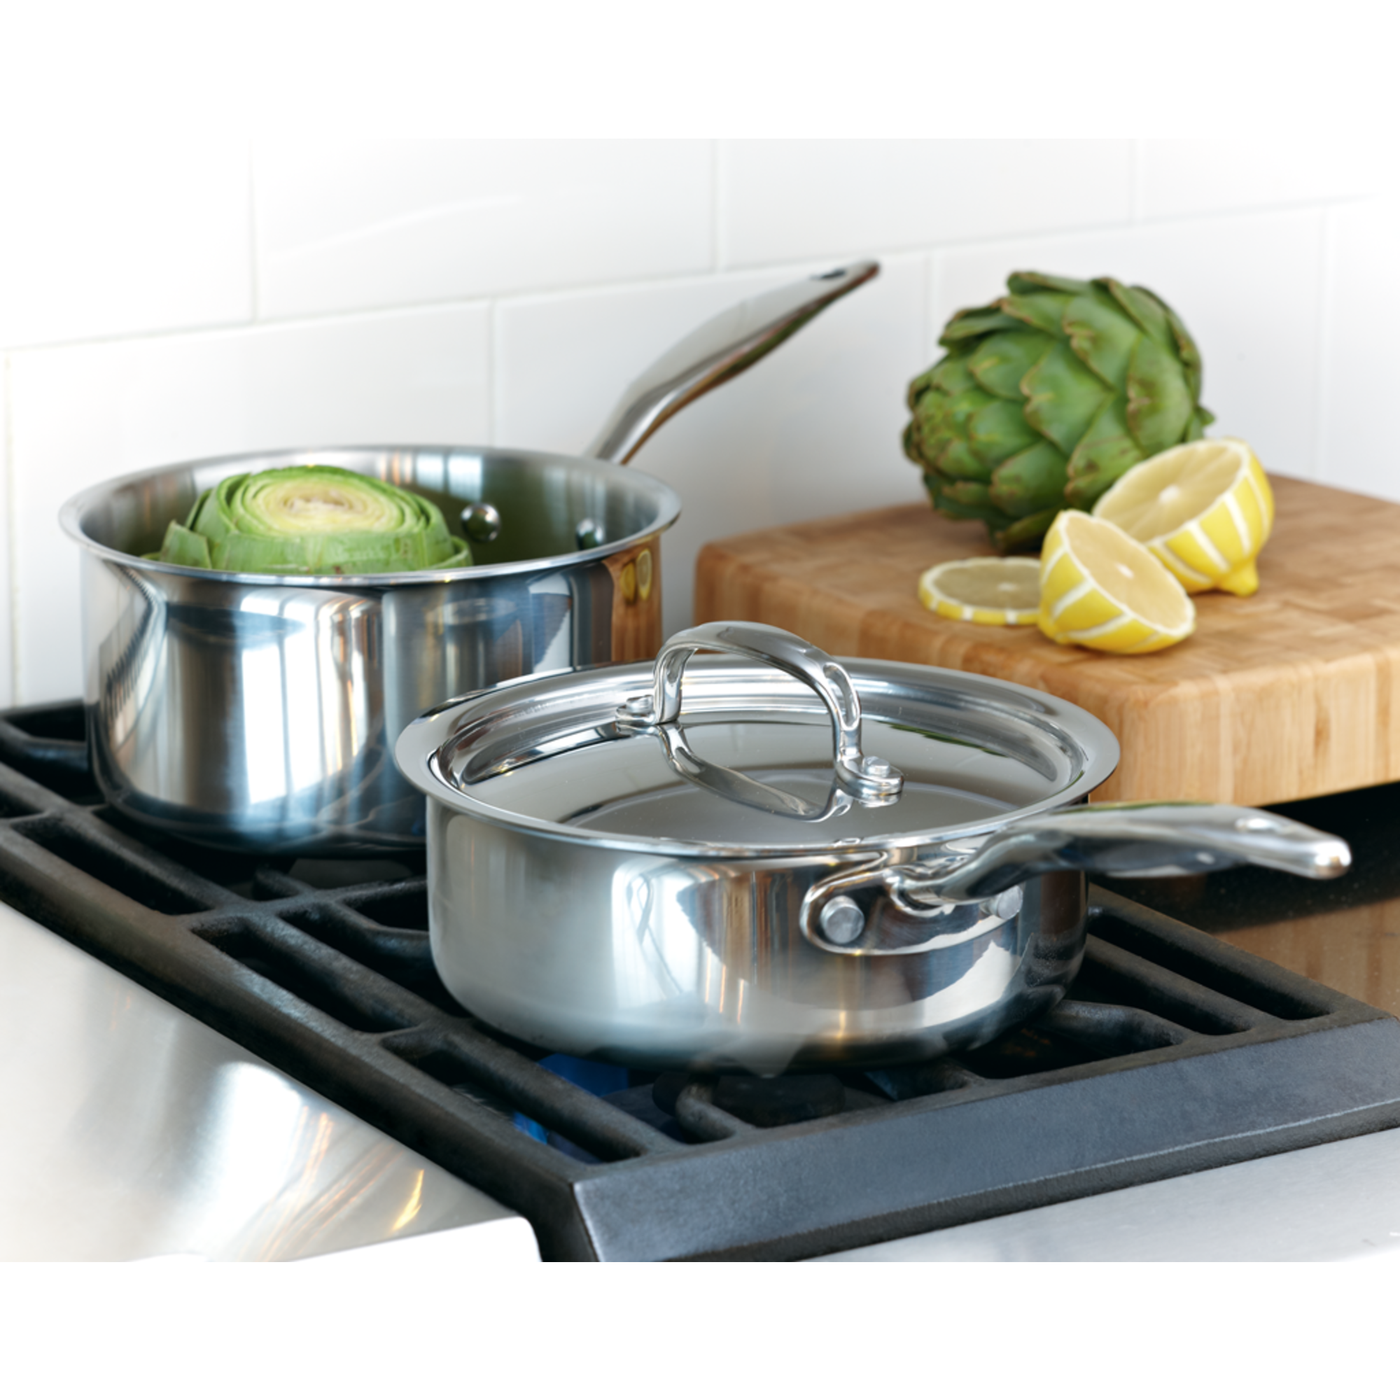 Heritage Steel 5 Piece Essentials Cookware Set - Made in USA - Titanium  Strengthened 316Ti Stainless Steel with 5-Ply Construction -  Induction-Ready